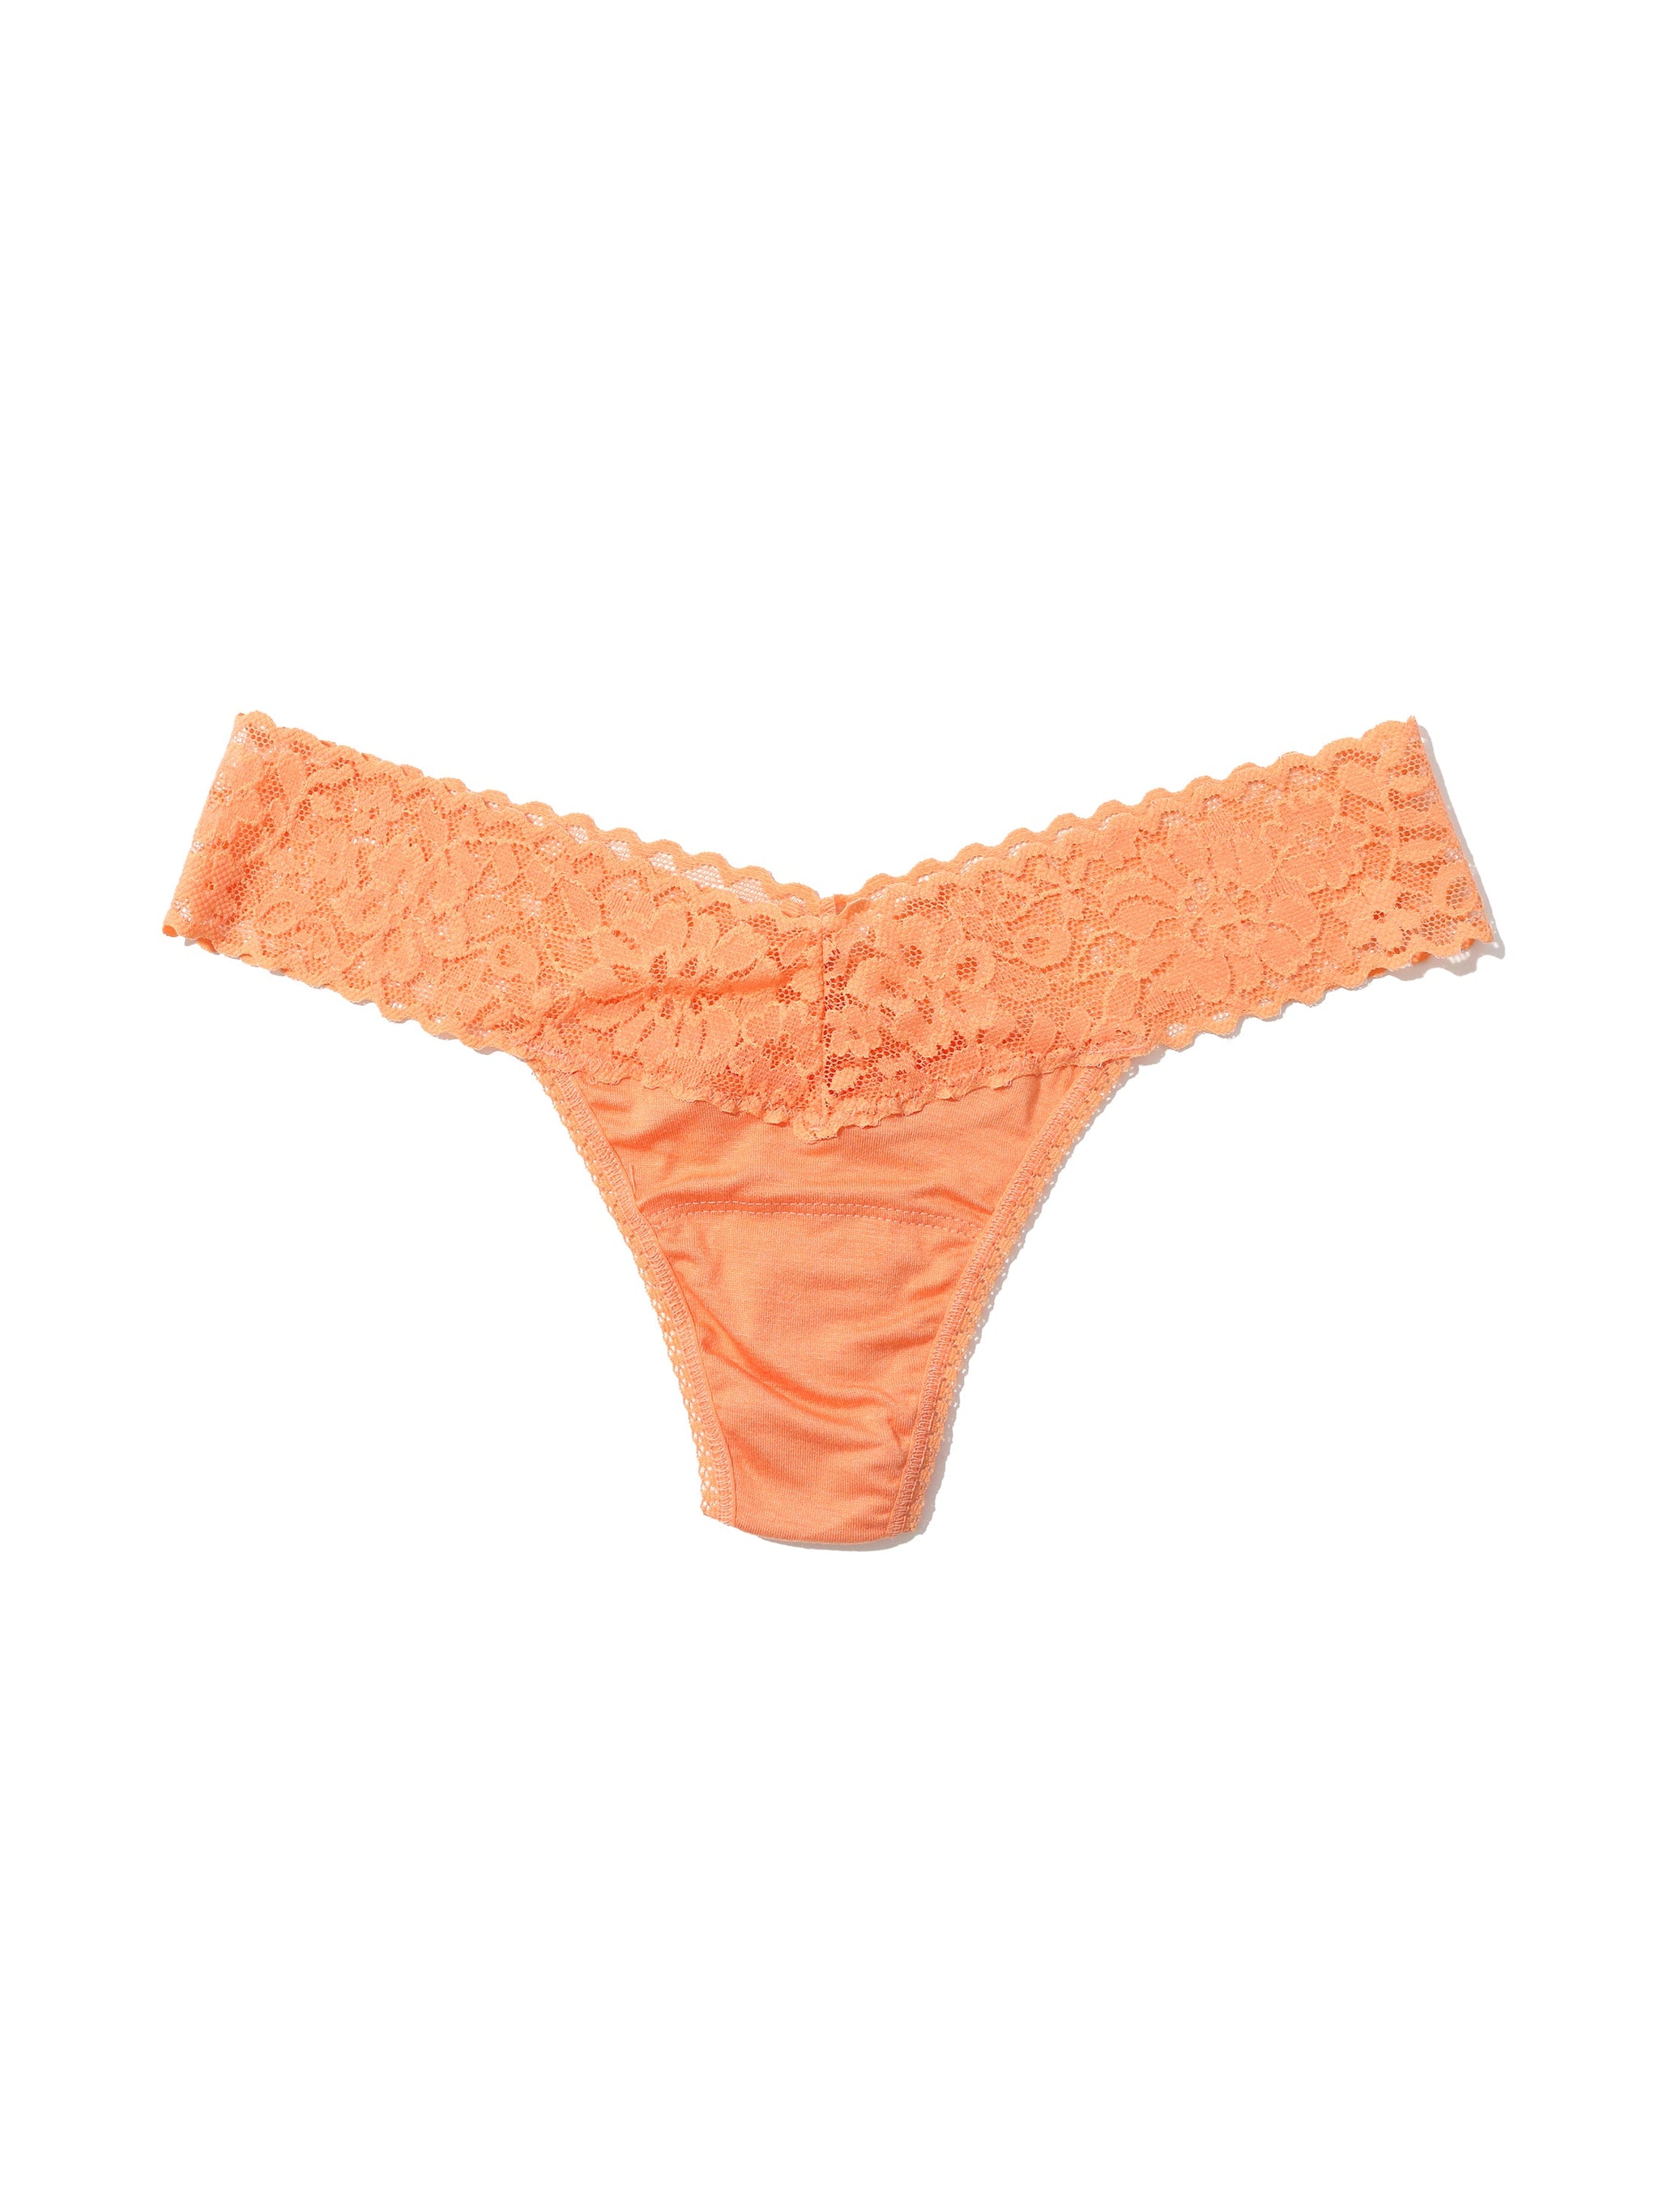 HANKY PANKY // Buttery Soft Lingerie Made in the U.S. - Everyday with Erin